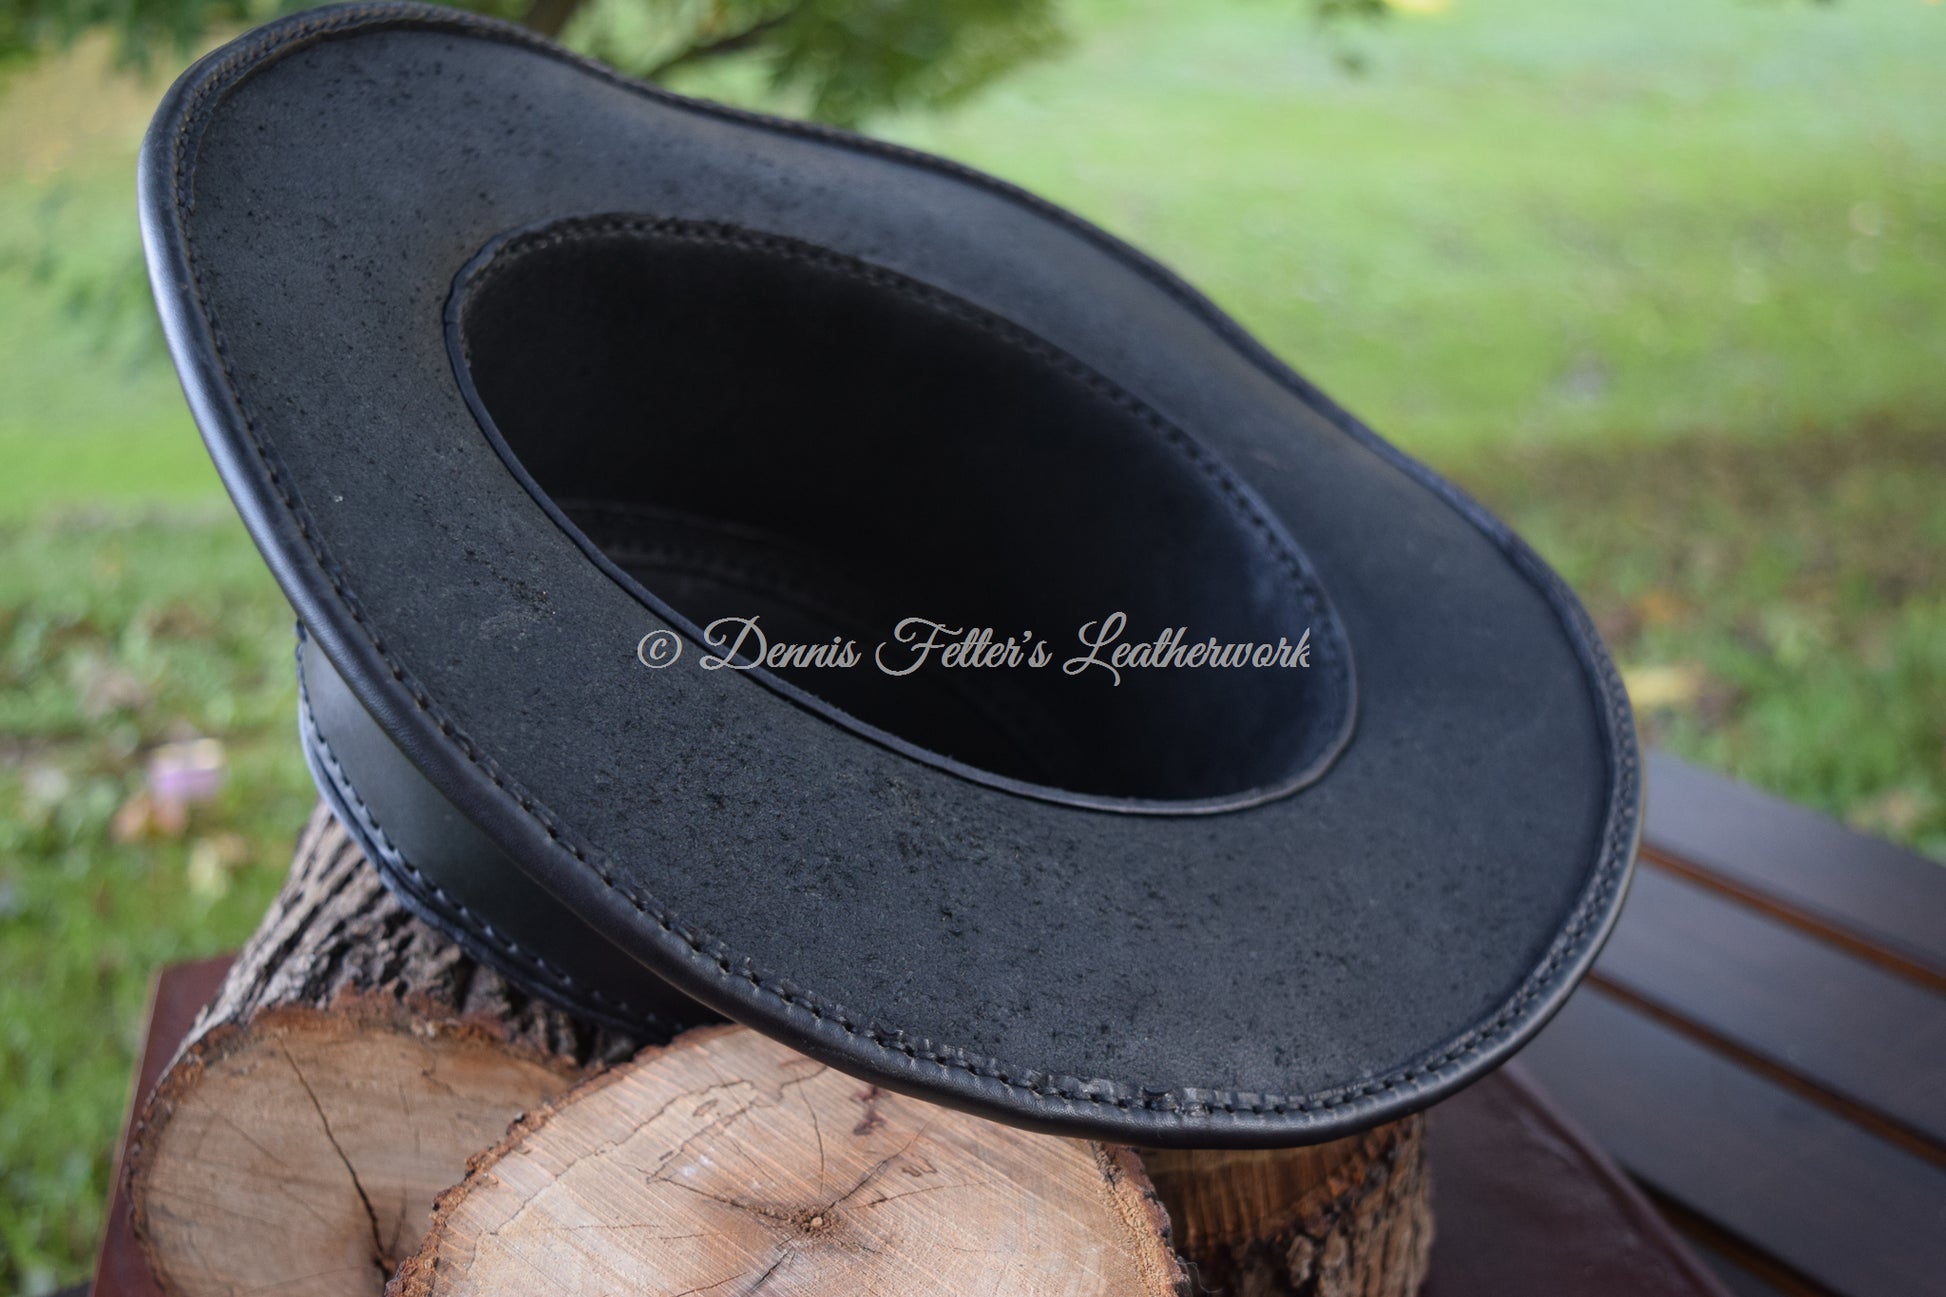 black leather alchemist / plague doctor hat - underneath view showing the entire hat in frame